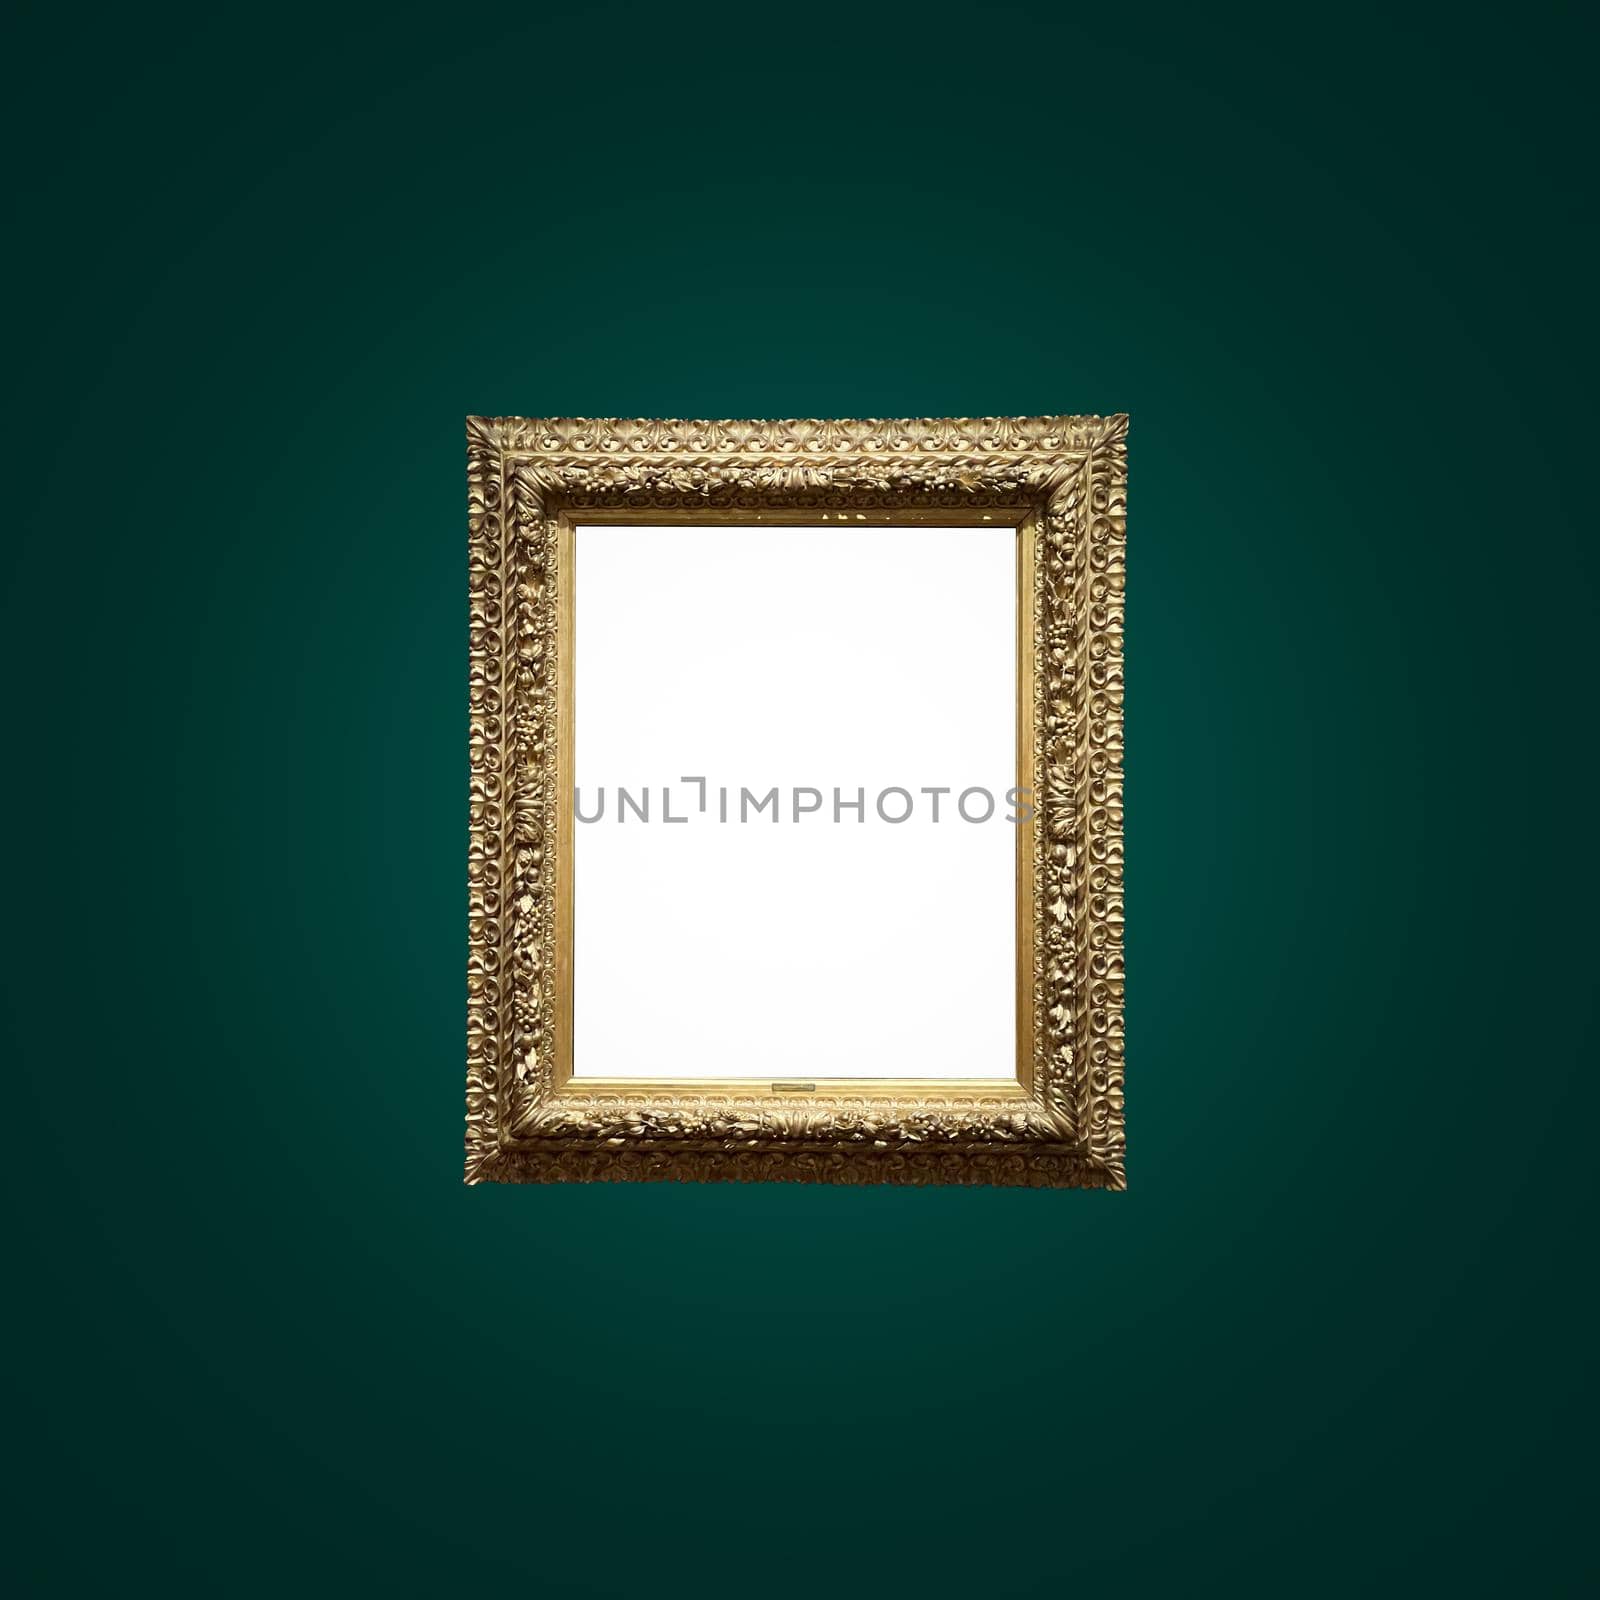 Antique art fair gallery frame on royal green wall at auction house or museum exhibition, blank template with empty white copyspace for mockup design, artwork by Anneleven